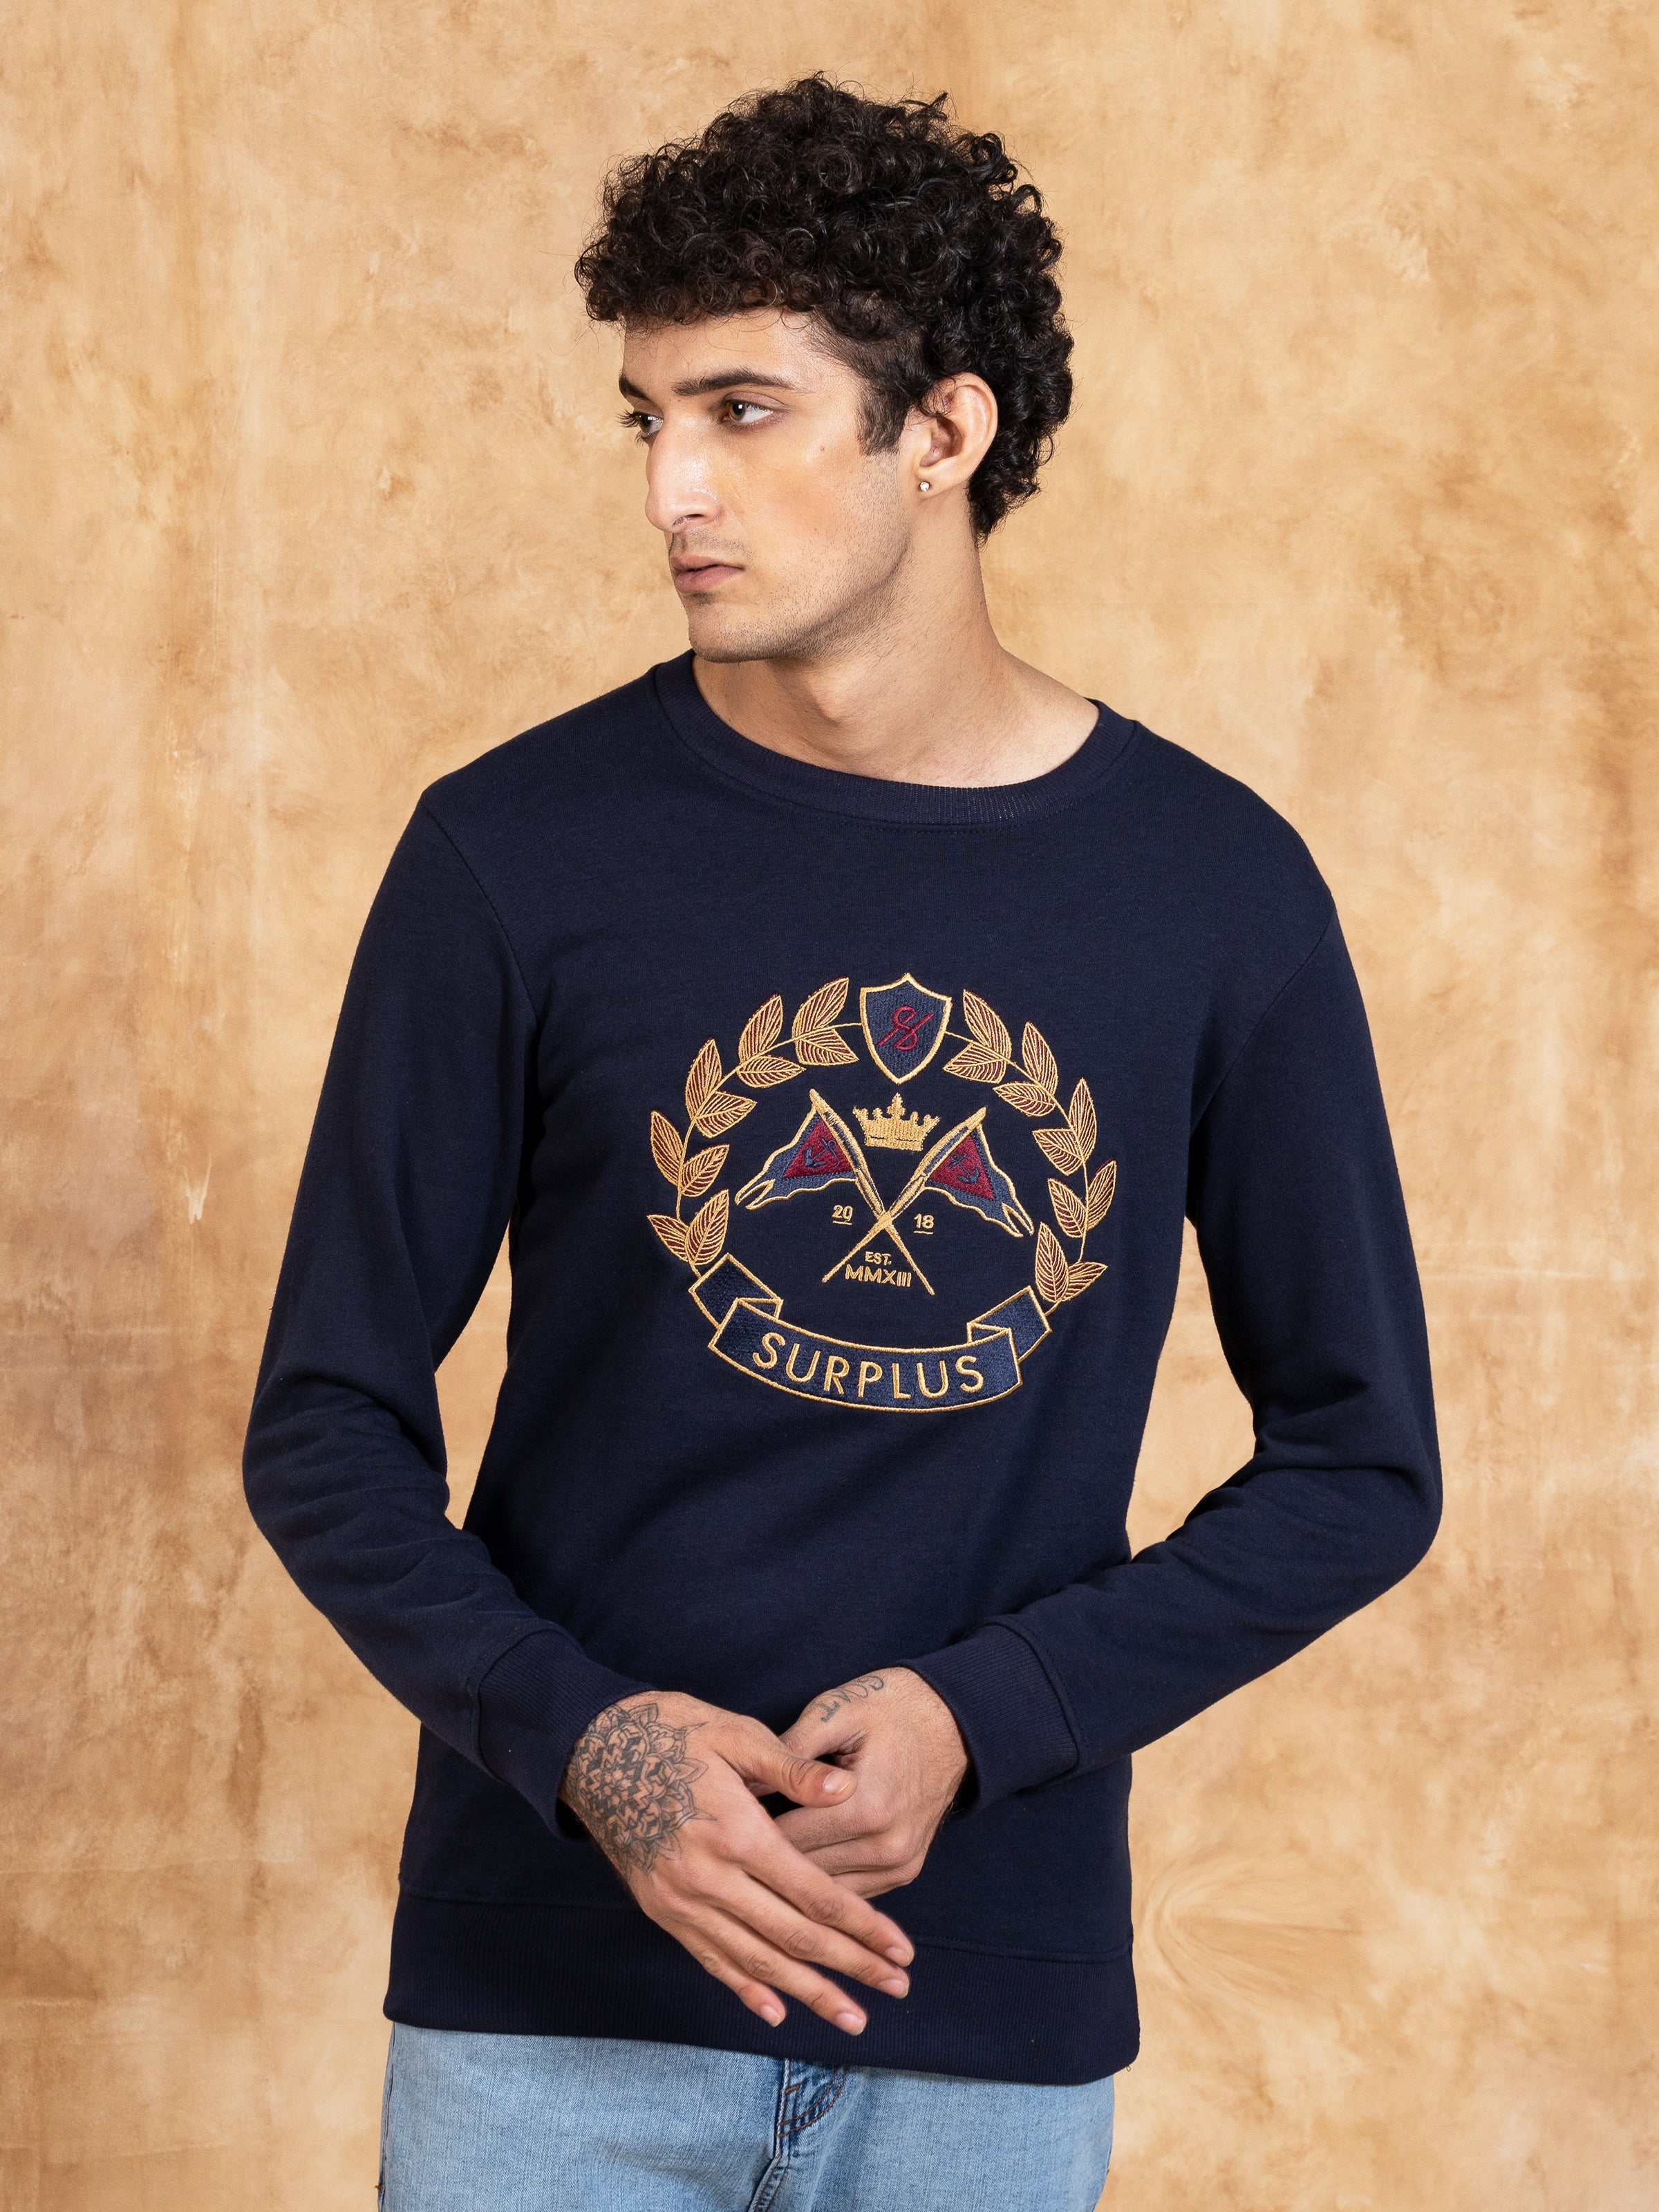 SWEAT SHIRT ROUND NECK EMBROIDED NAVY